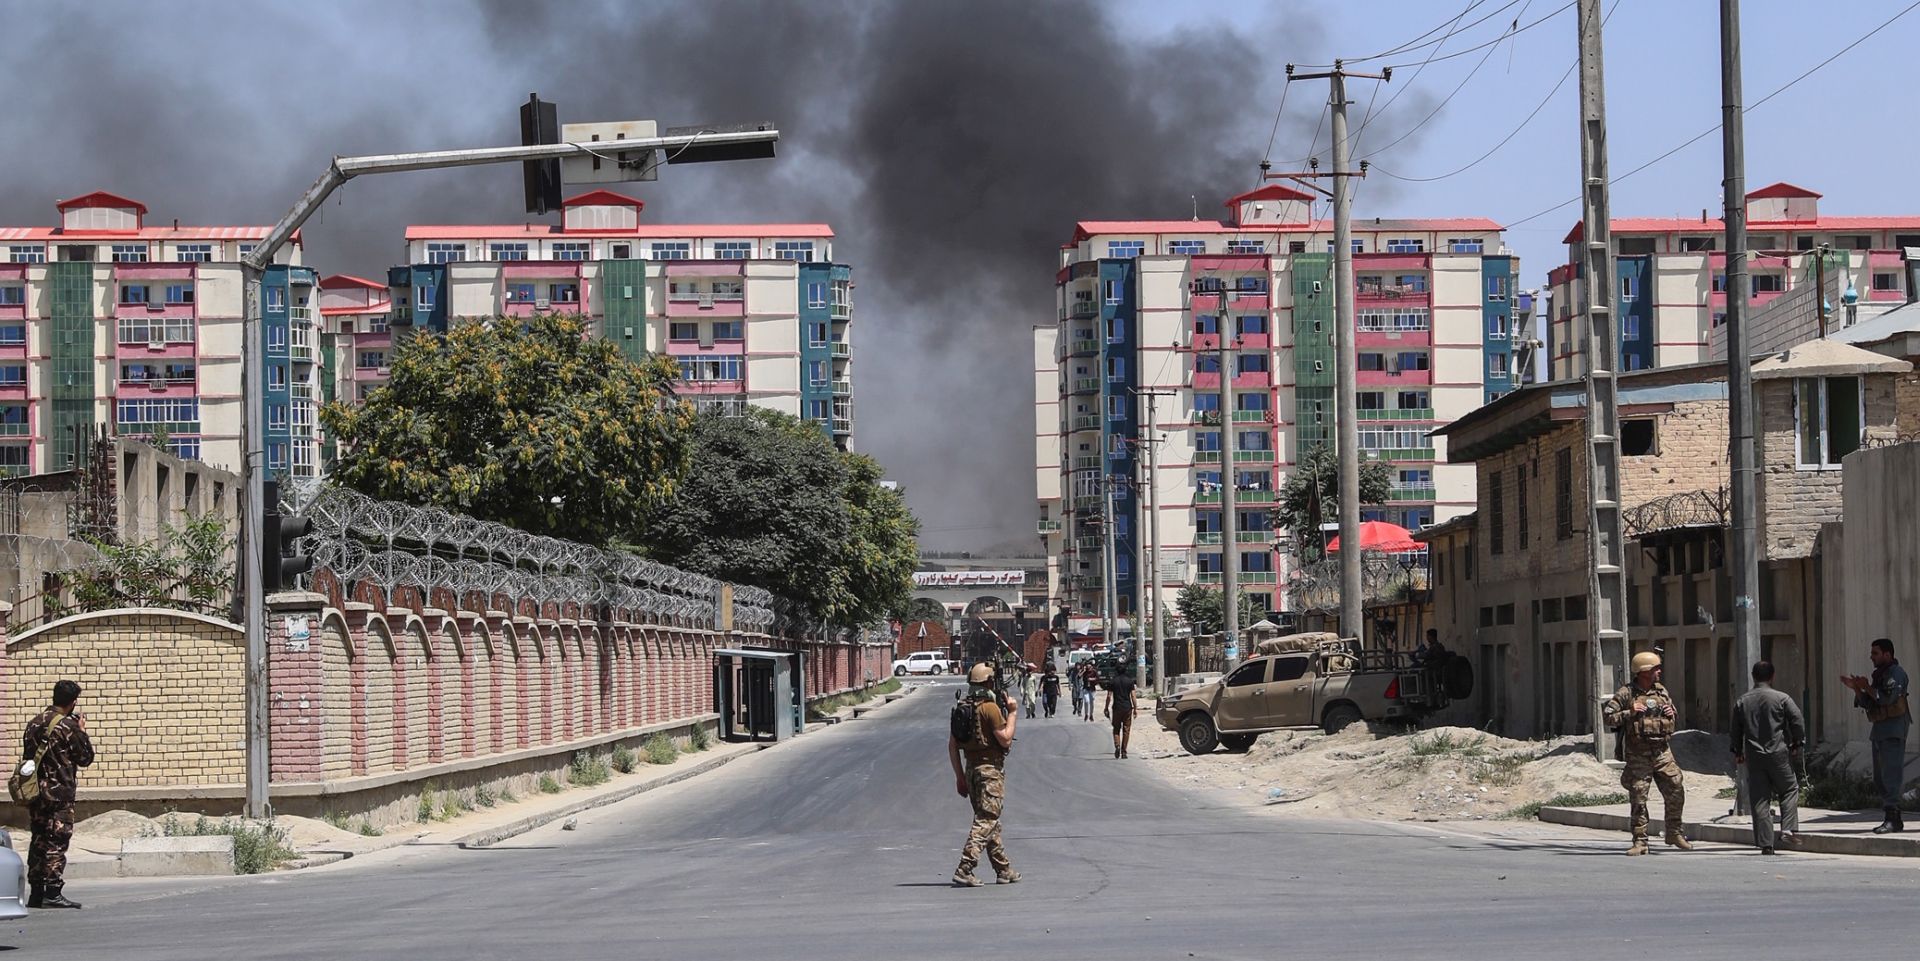 epa07686519 Afghan security officials secure the scene of a suicide bomb blast near a governmental institution in downtown Kabul, Afghanistan, 01 July 2019. According to reports, at least 10 people were killed and 65 others were injured after a bomb blast near the Ministry of Defense building.  EPA/HEDAYATULLAH AMID